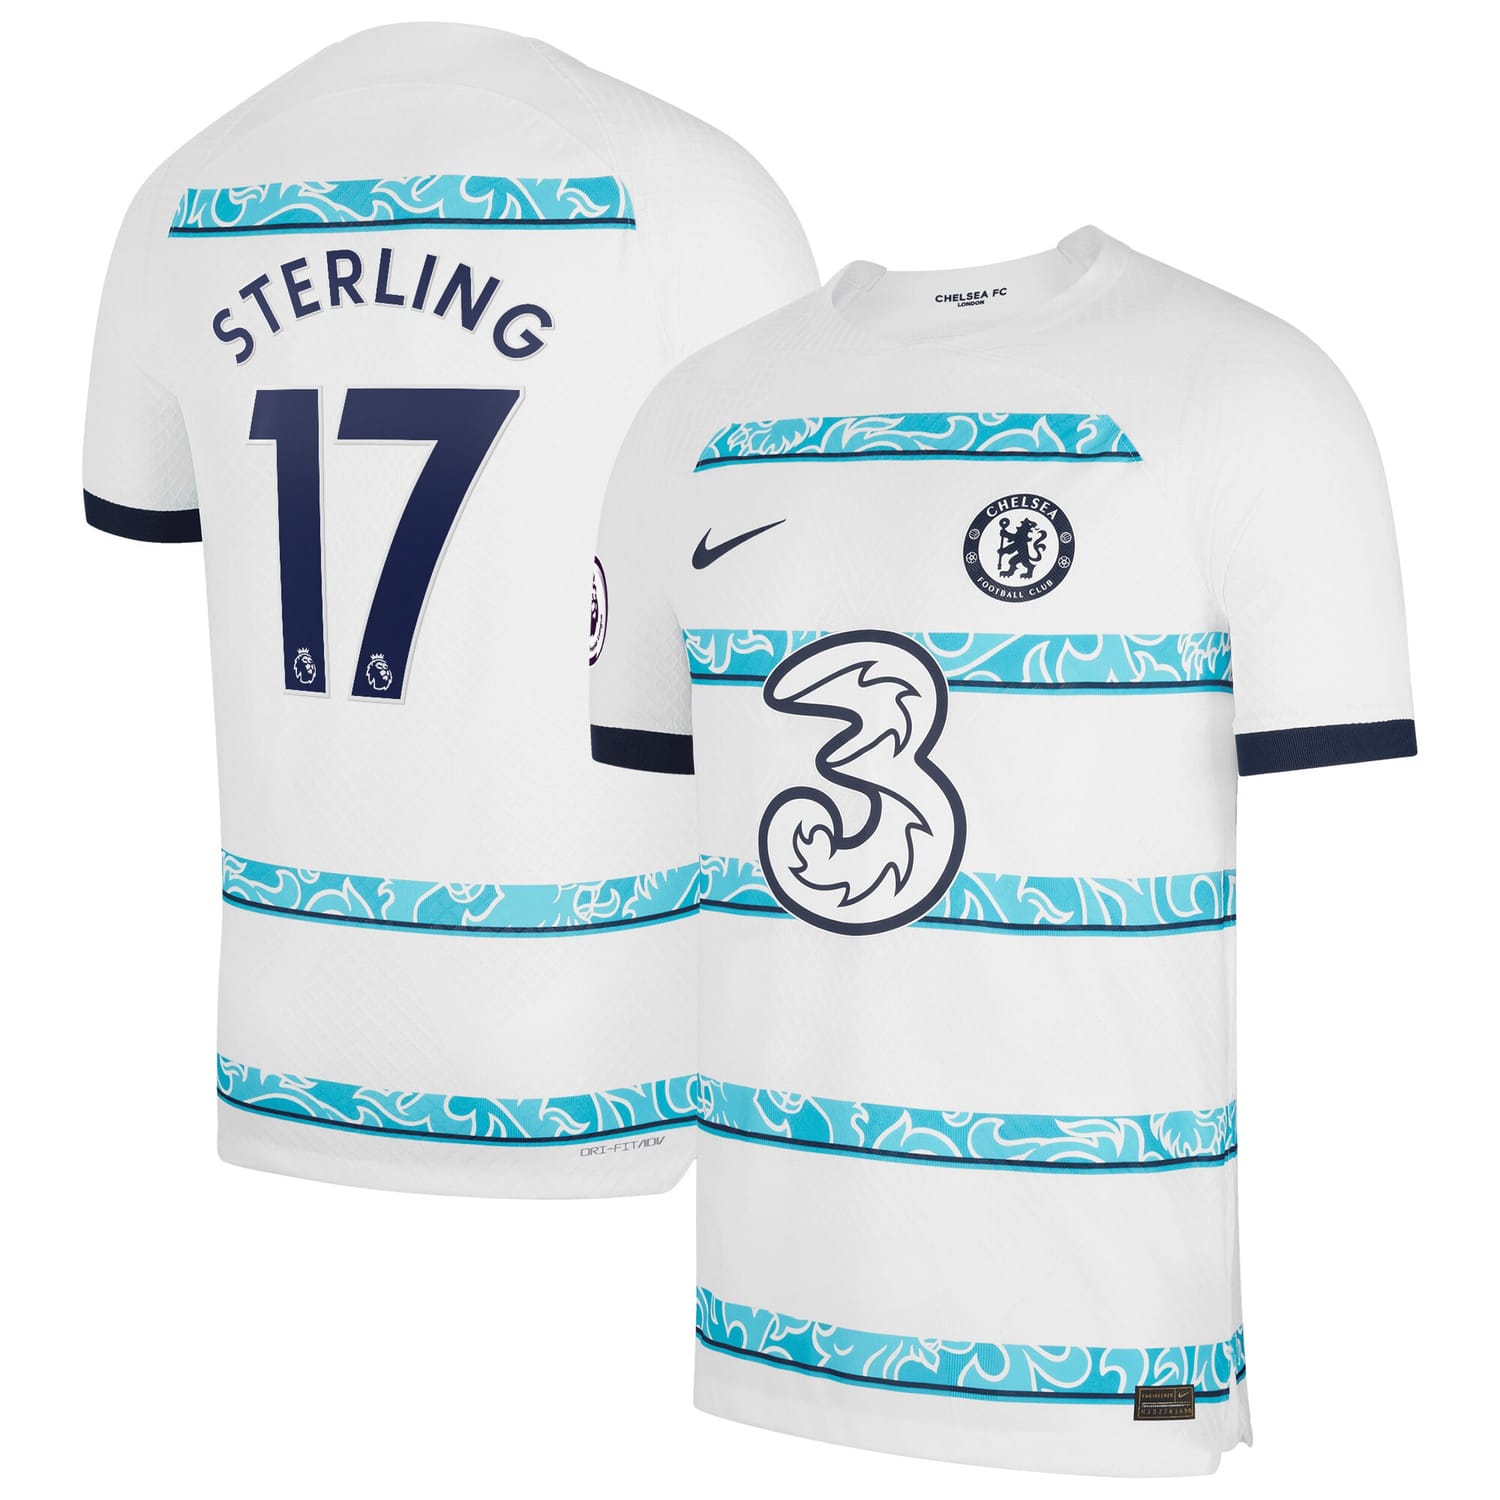 Premier League Chelsea Away Authentic Jersey Shirt White 2022-23 player Raheem Sterling printing for Men